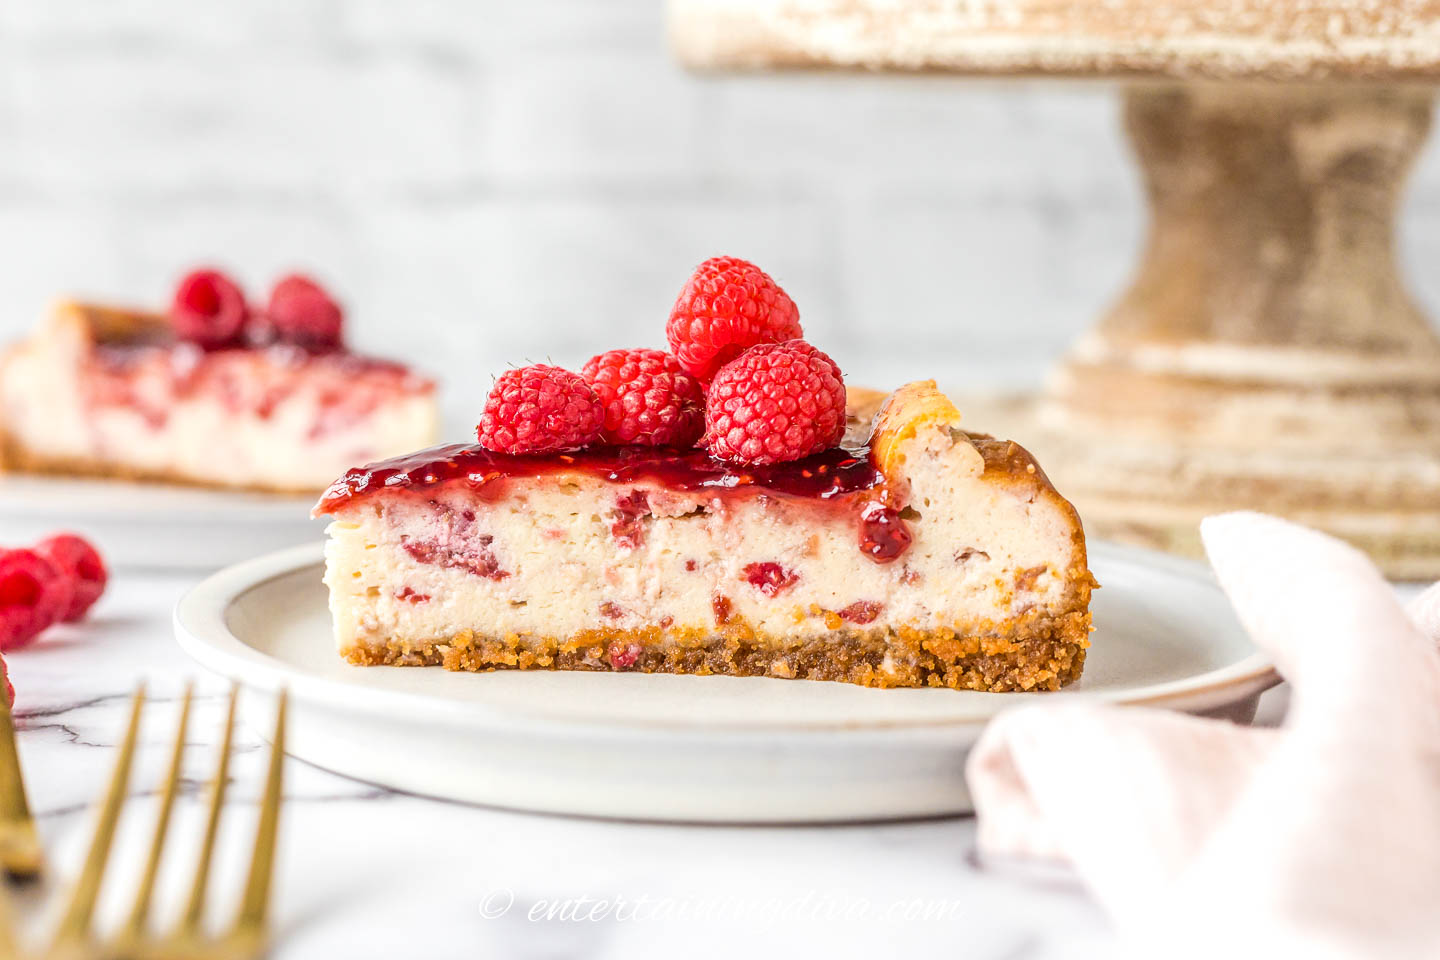 Side view of a slice of baked raspberry cheesecake on a plate